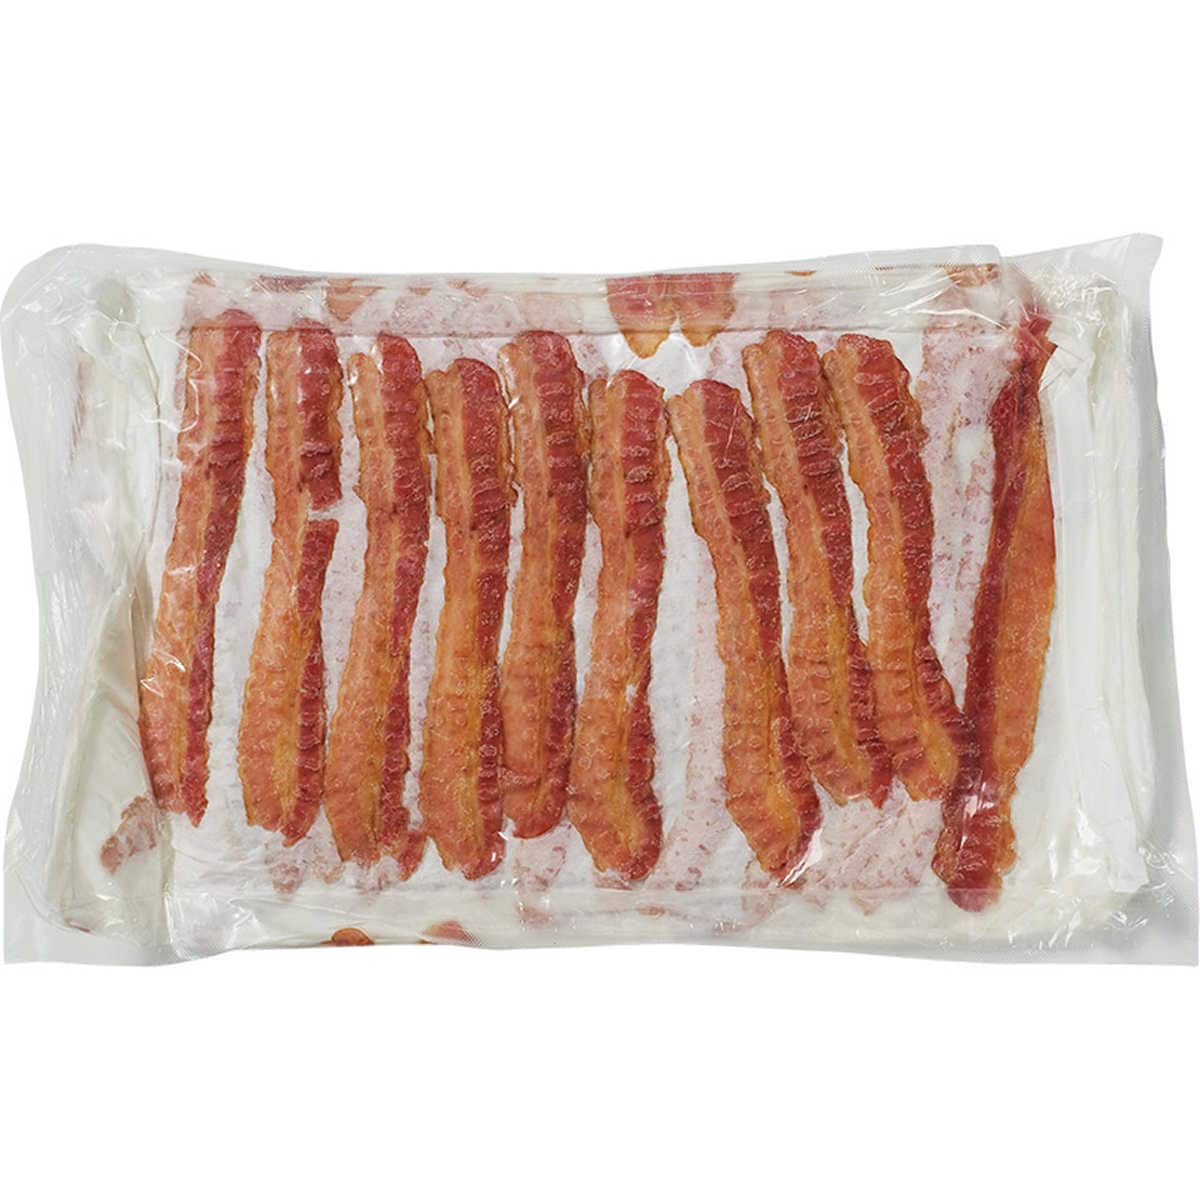 slide 1 of 1, Daily's Precooked Bacon, 300 ct